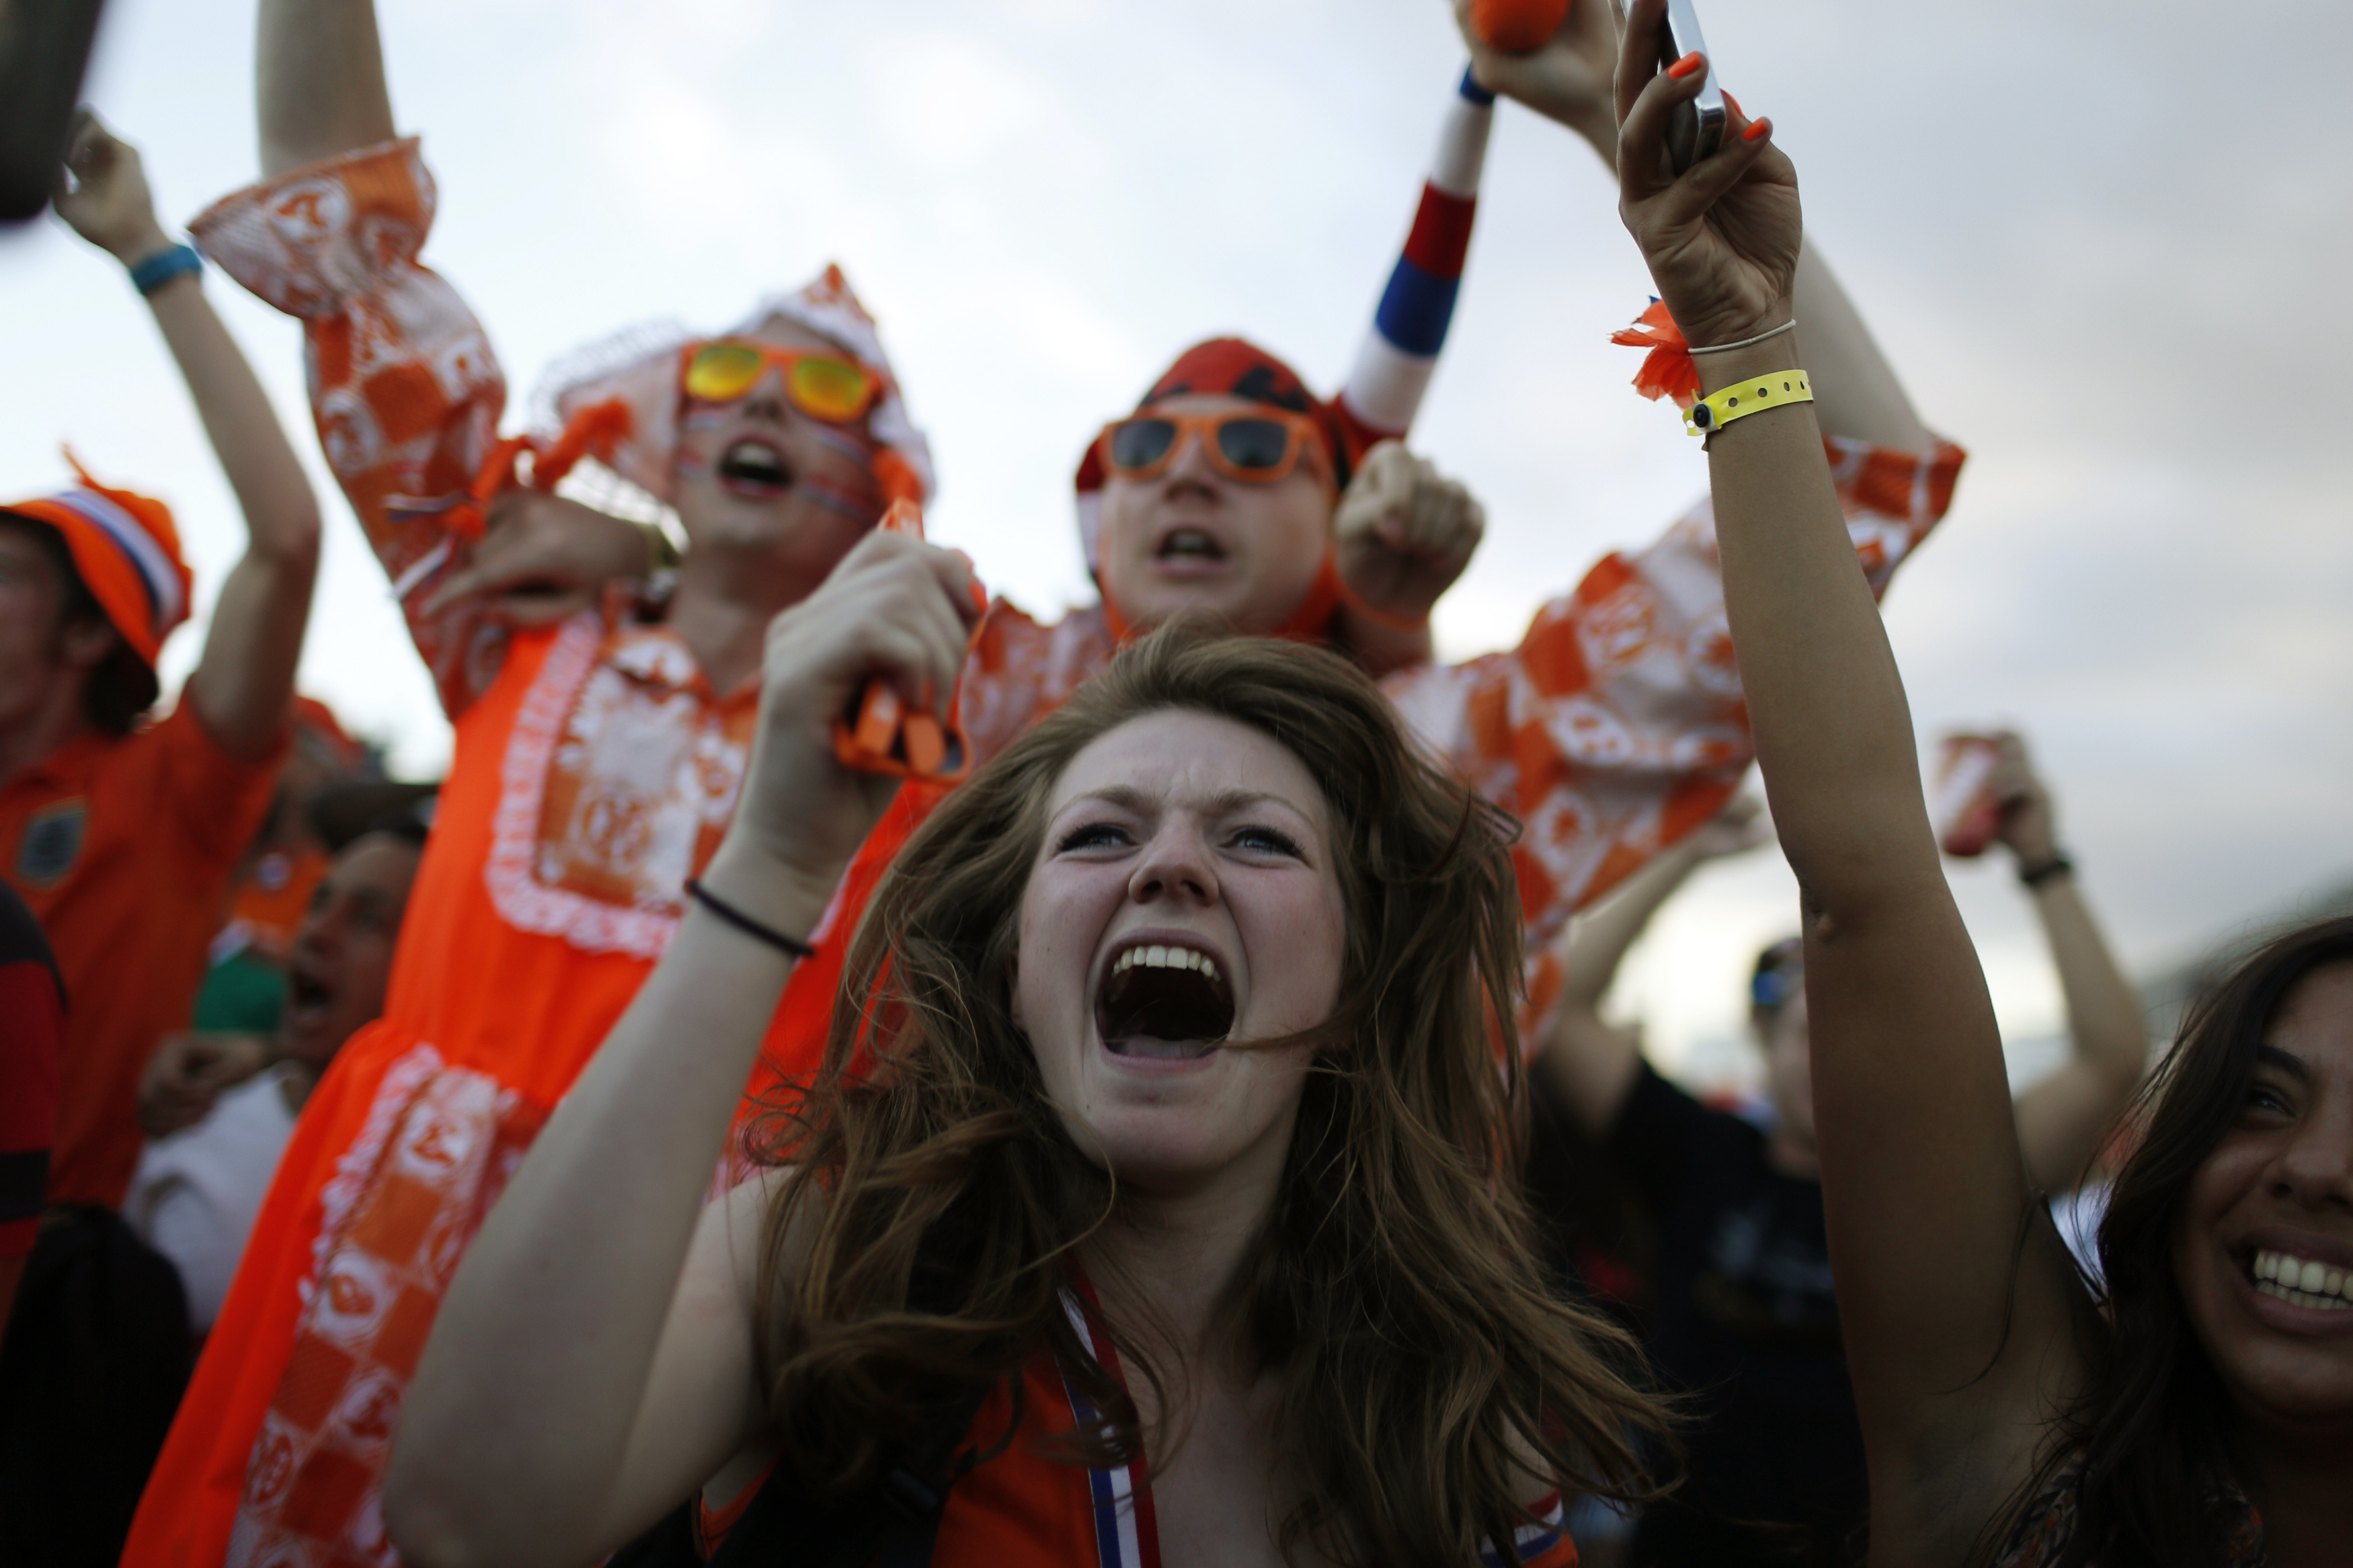 Dutch soccer fans celebrate a goal as they watch a broadcast of the match between the Netherlands and Spain on a large screen at Copacabana beach in Rio de Janeiro on June 13, 2014.